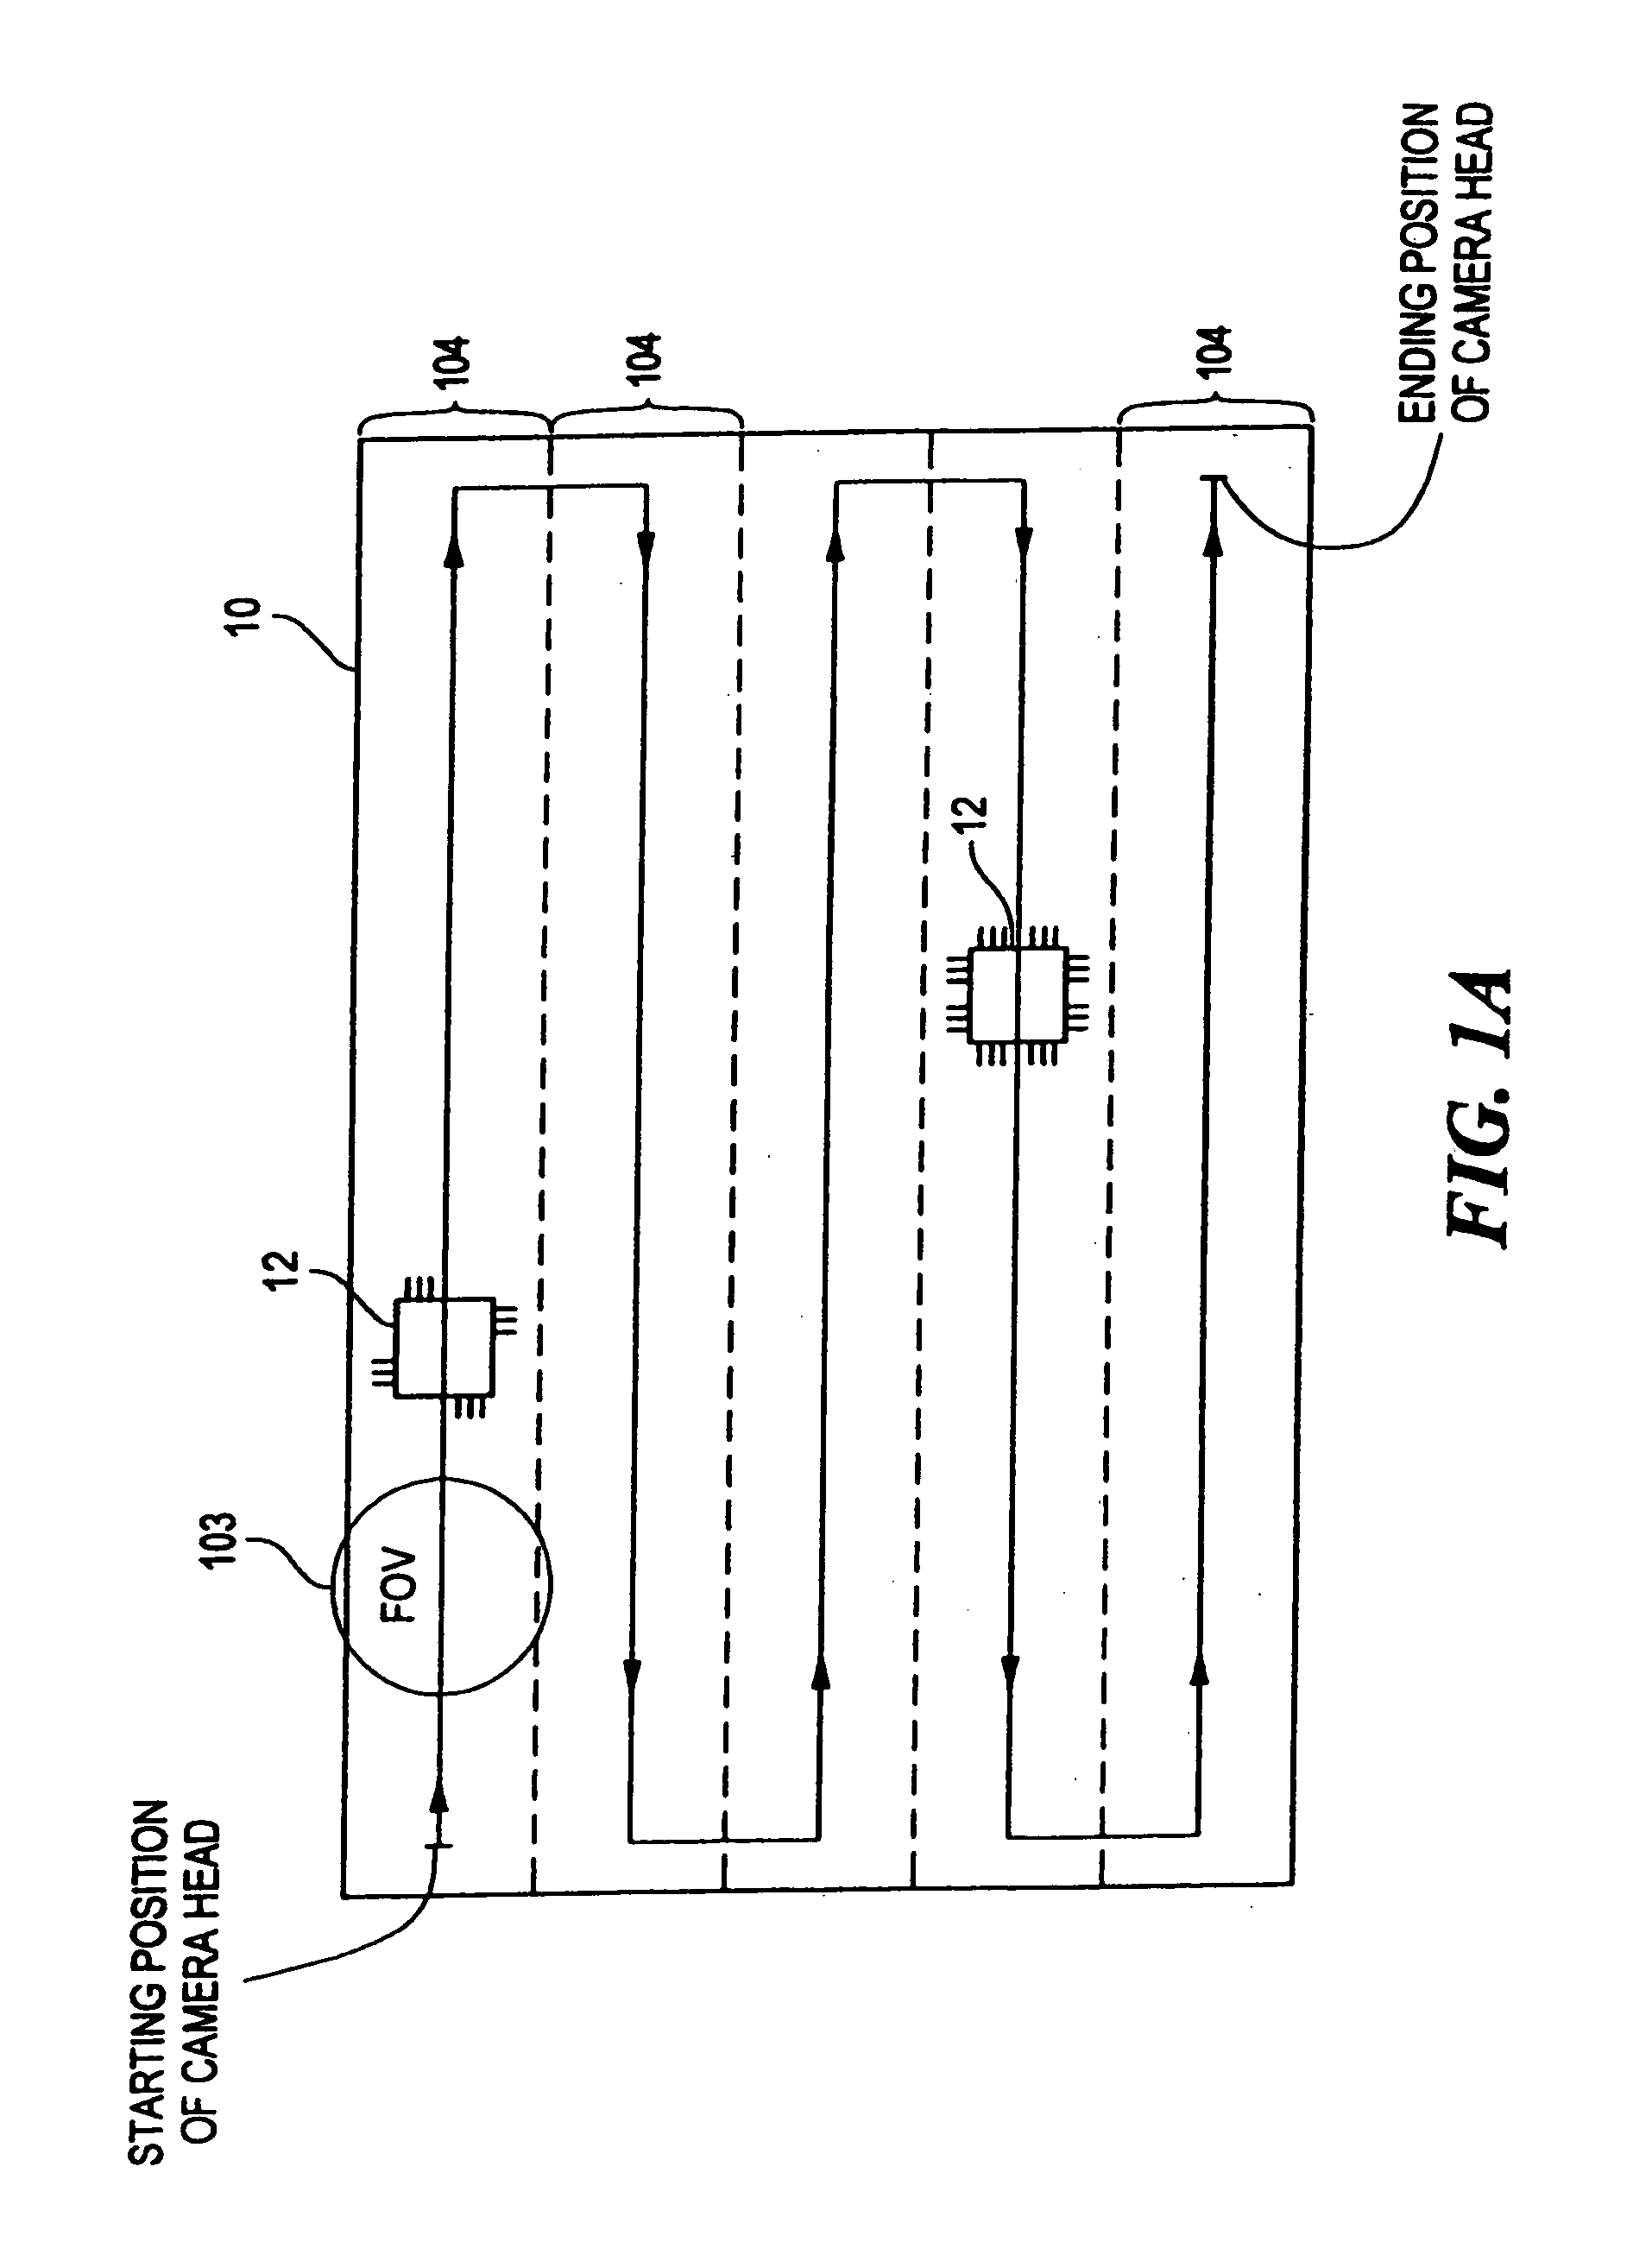 Optical inspection system